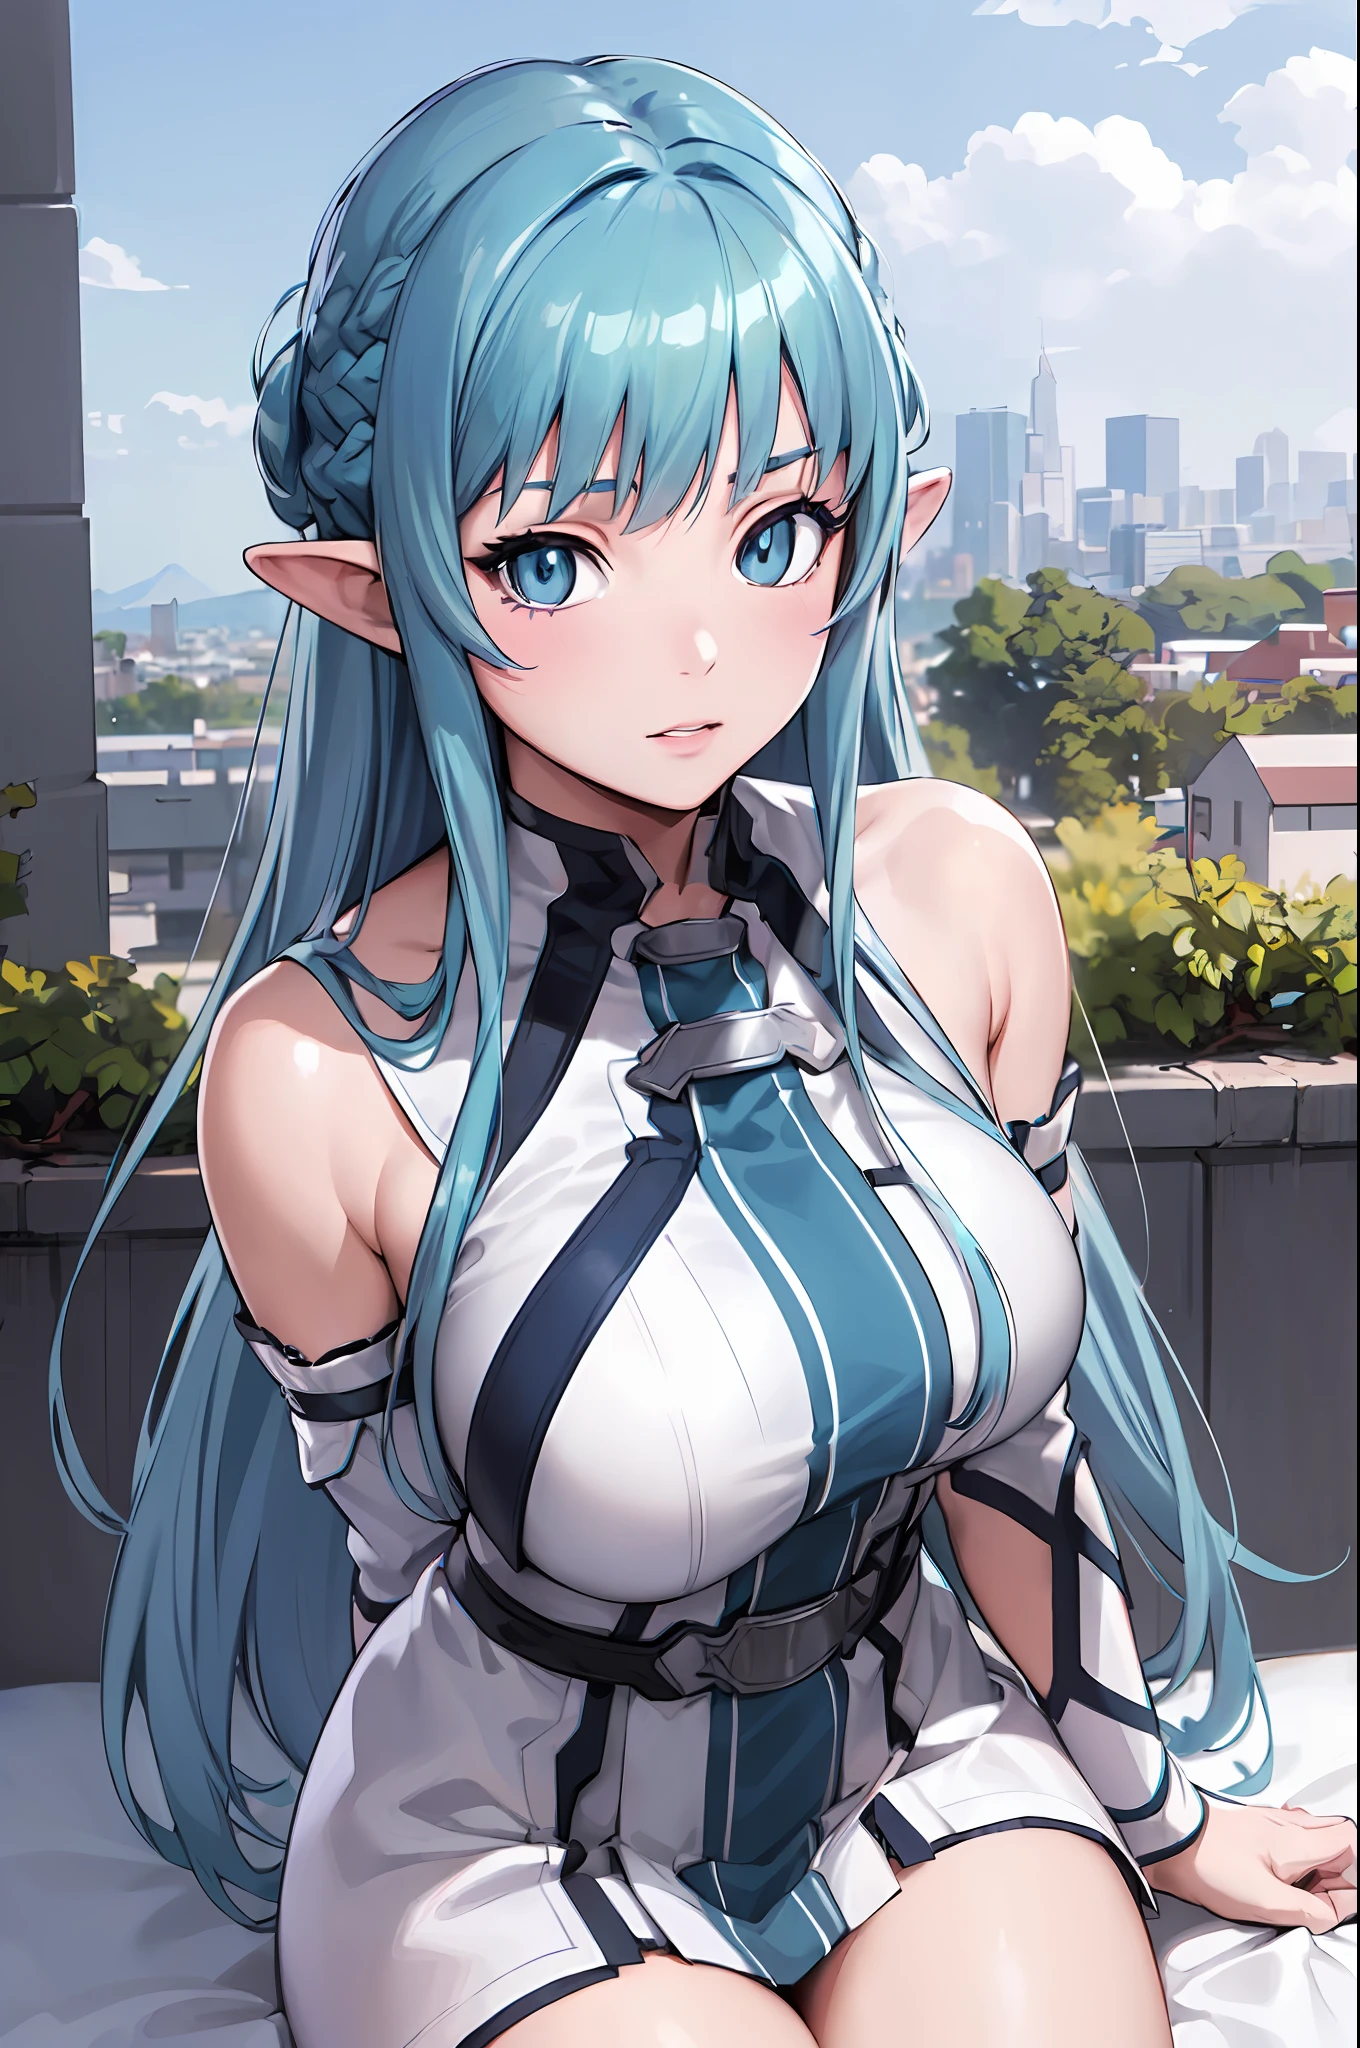 (Masterpiece:1.5), extremely detailed CG unity 8k wallpaper, beautiful breasts,chromatic_aberration,beautiful detailed shadow,beautiful eyes,beautiful body,beautiful skin,beautiful hand,(Curve,Model,glamor:1.5),(Realistic, hyper realisitic:1.5),(Blue hair:1.5),(blue eyess:1.5),Large breasts,Style image of woman undressed, Seductive Anime Girl, Big curvaceous, beautiful alluring anime teen, Beautiful anime girl, charming anime girls, Smooth Anime CG Art, Ilya Kuvshinov with long hair, beautiful alluring anime woman, Anime Best Girl, asunayuuki, On my bed, pretty anime girl